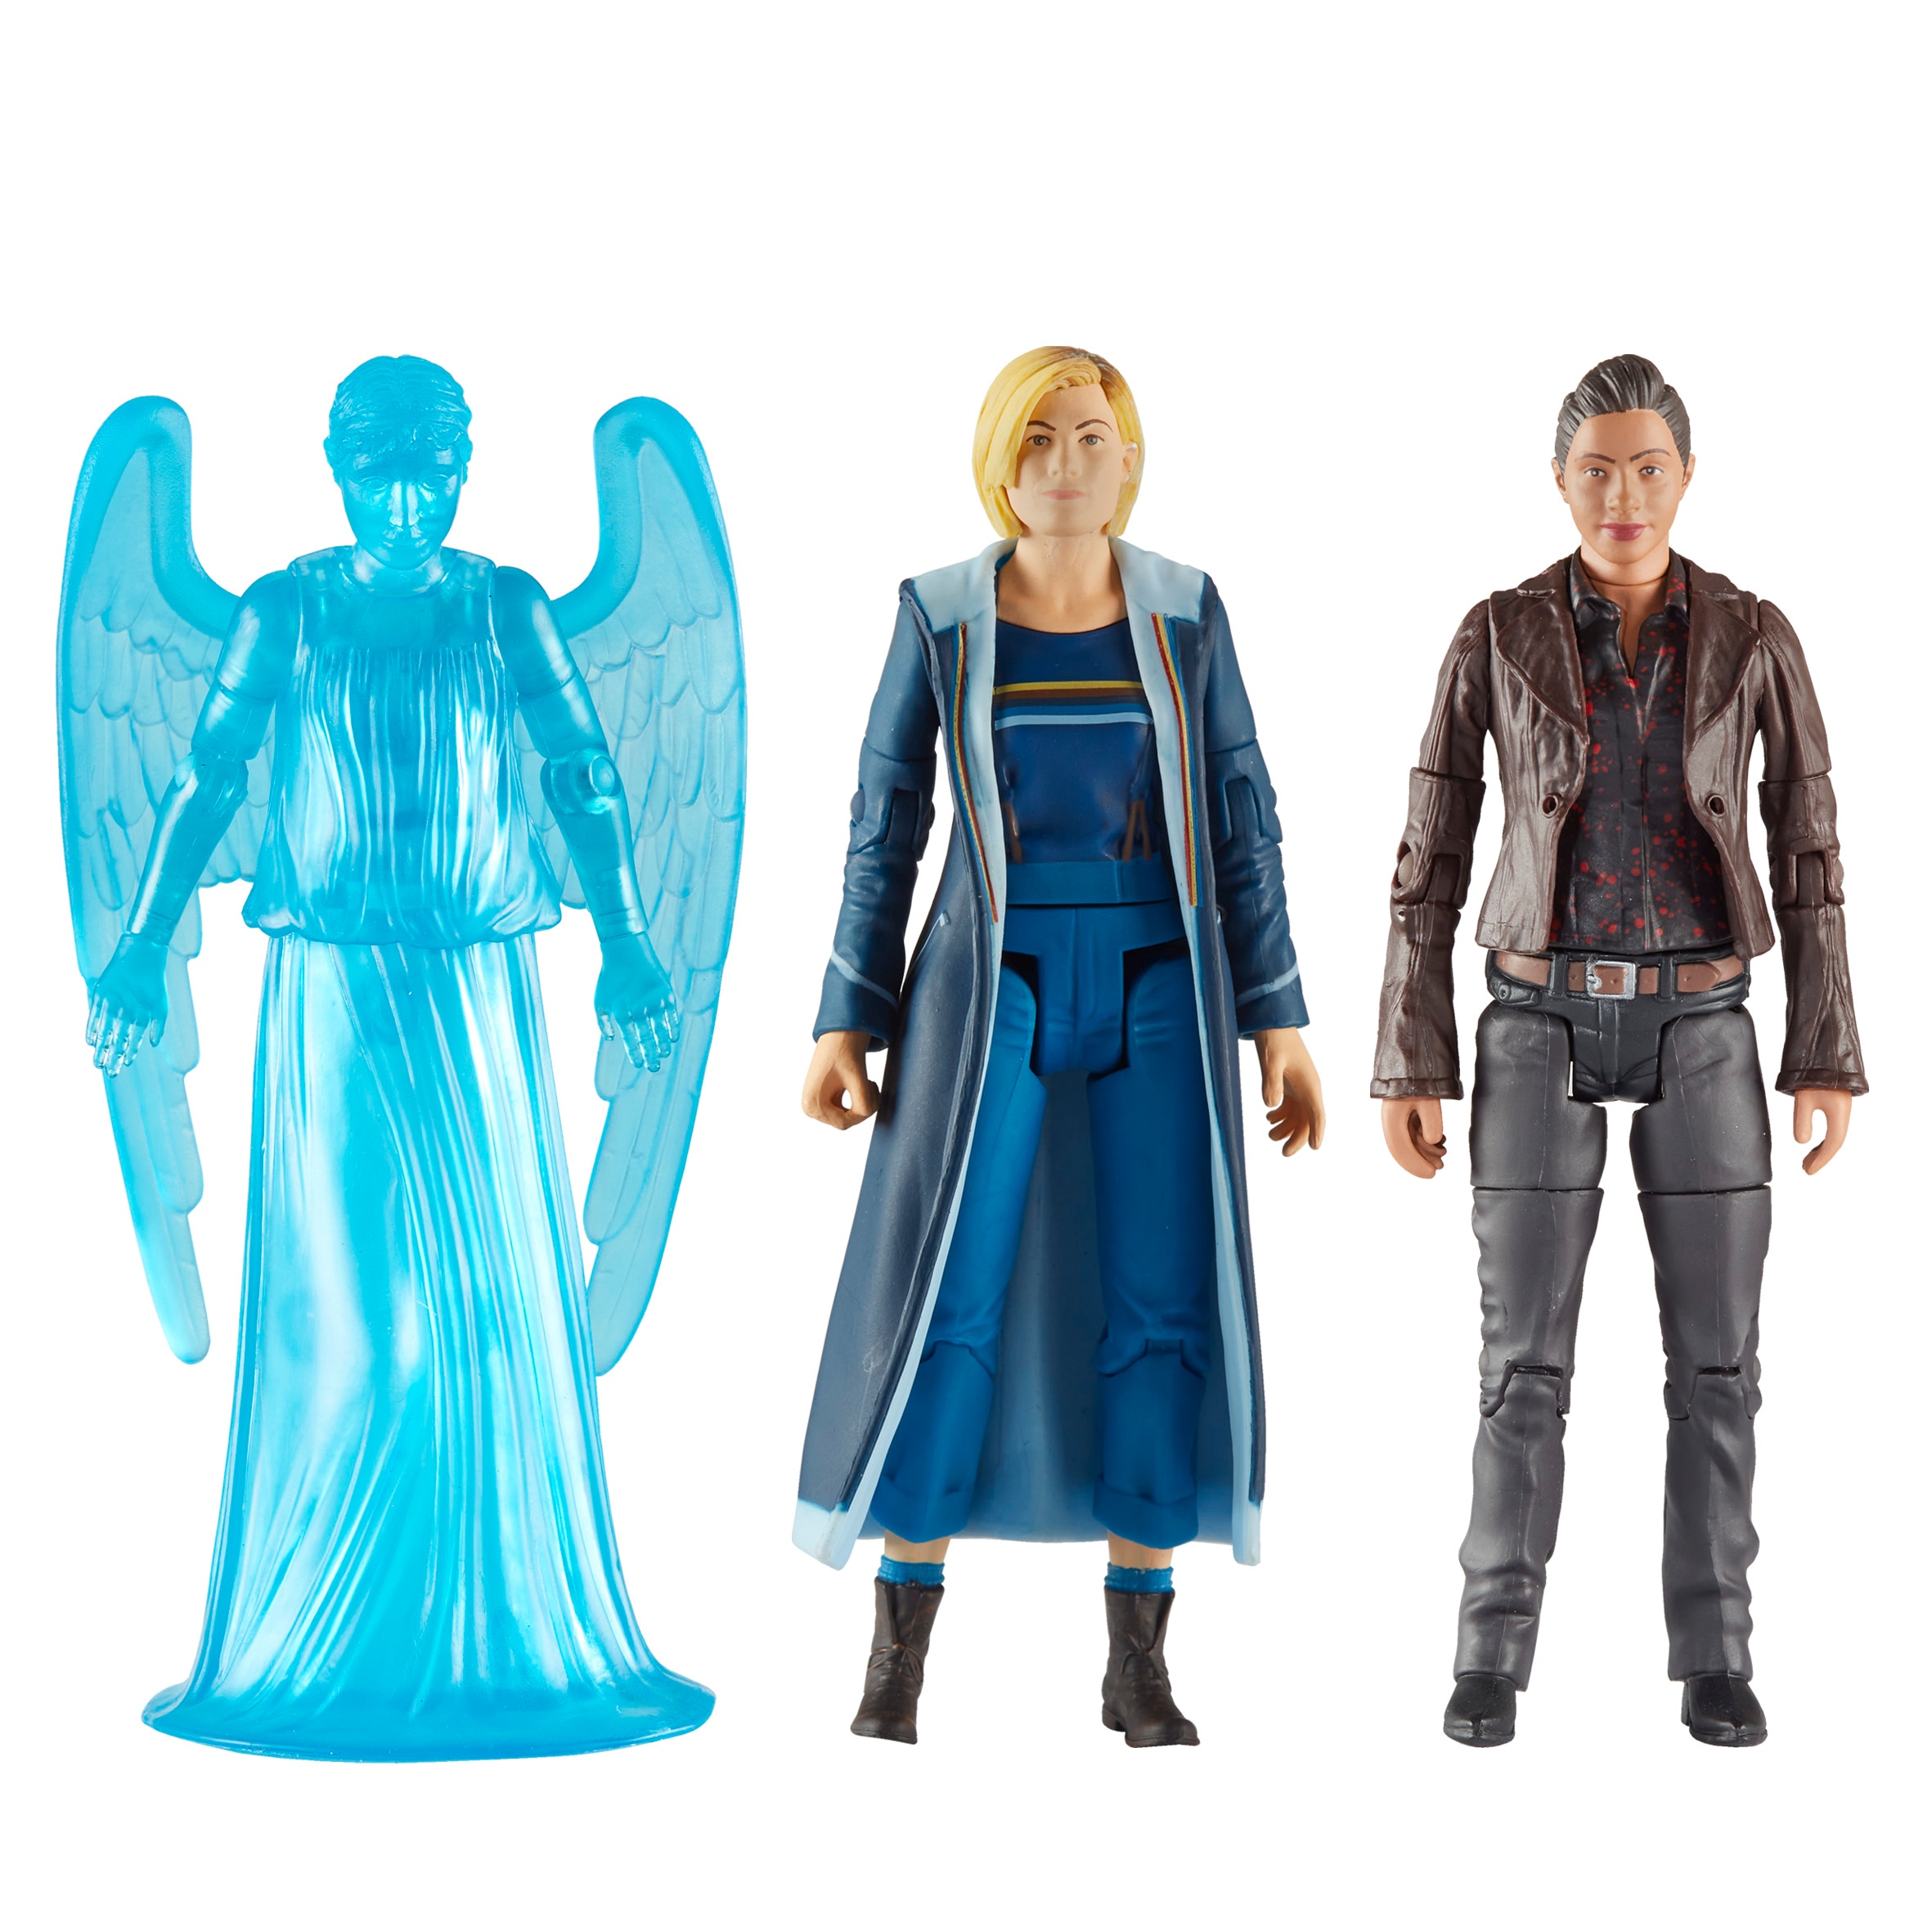 The Thirteenth Doctor and Yaz action figures, coming soon | Doctor Who